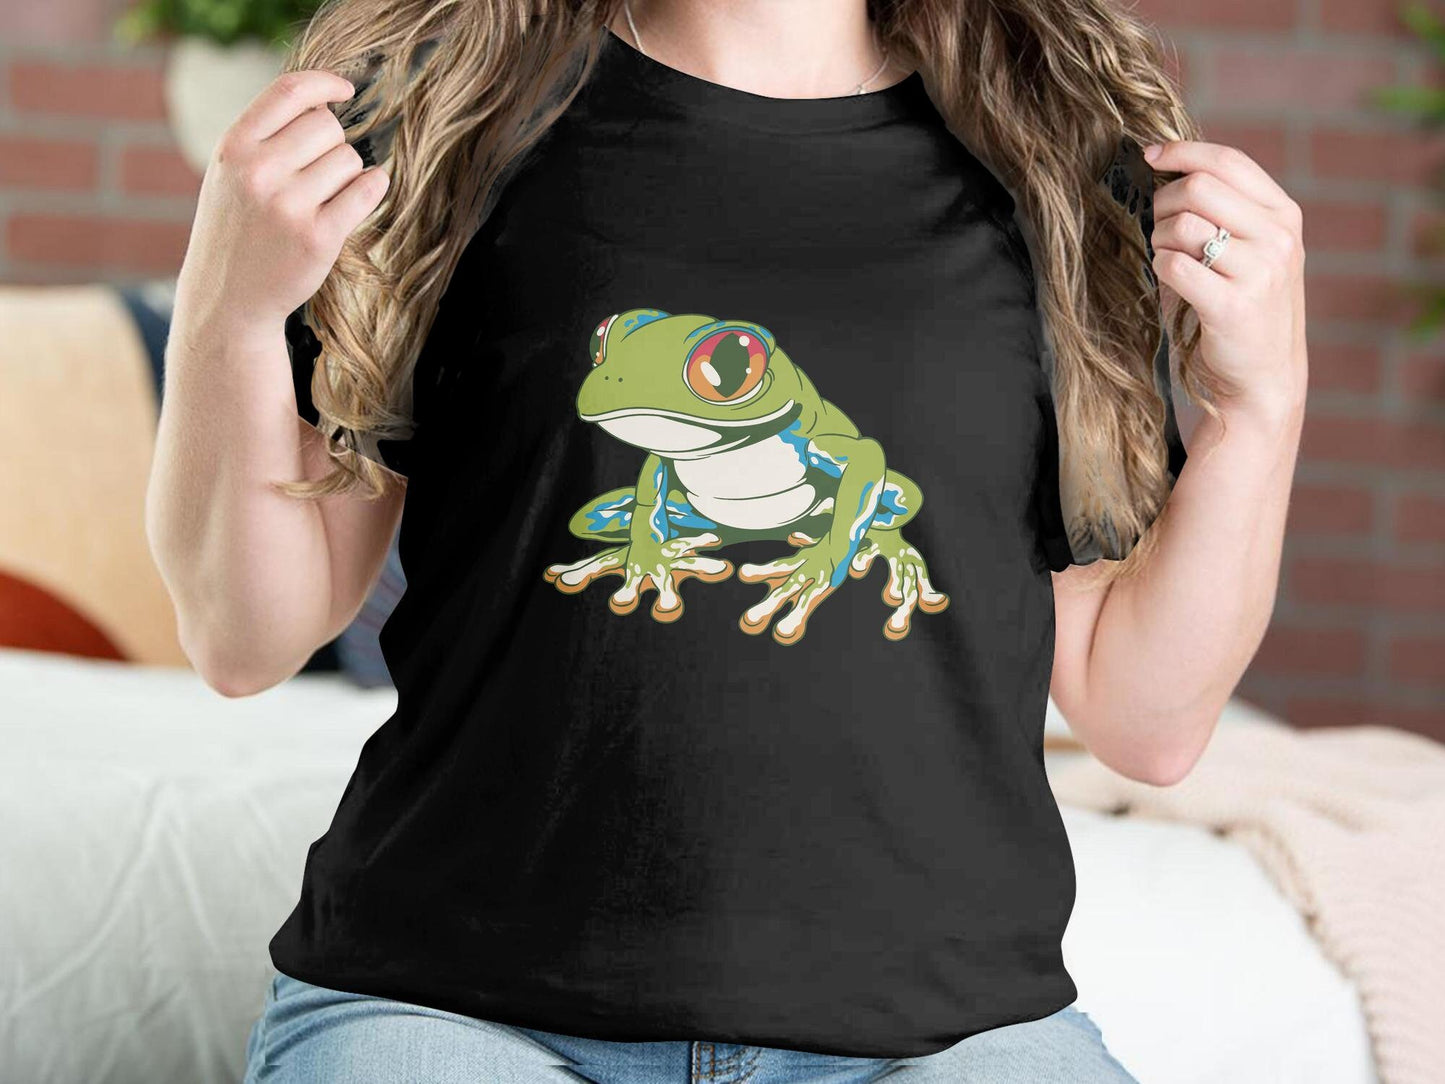 Minimalist Frog Shirt, Funny Froggy Shirt, Cottagecore Froggy Tee, Toad Shirt, Frog Lover Shirt, Frog Lover Gift, Frog Graphic